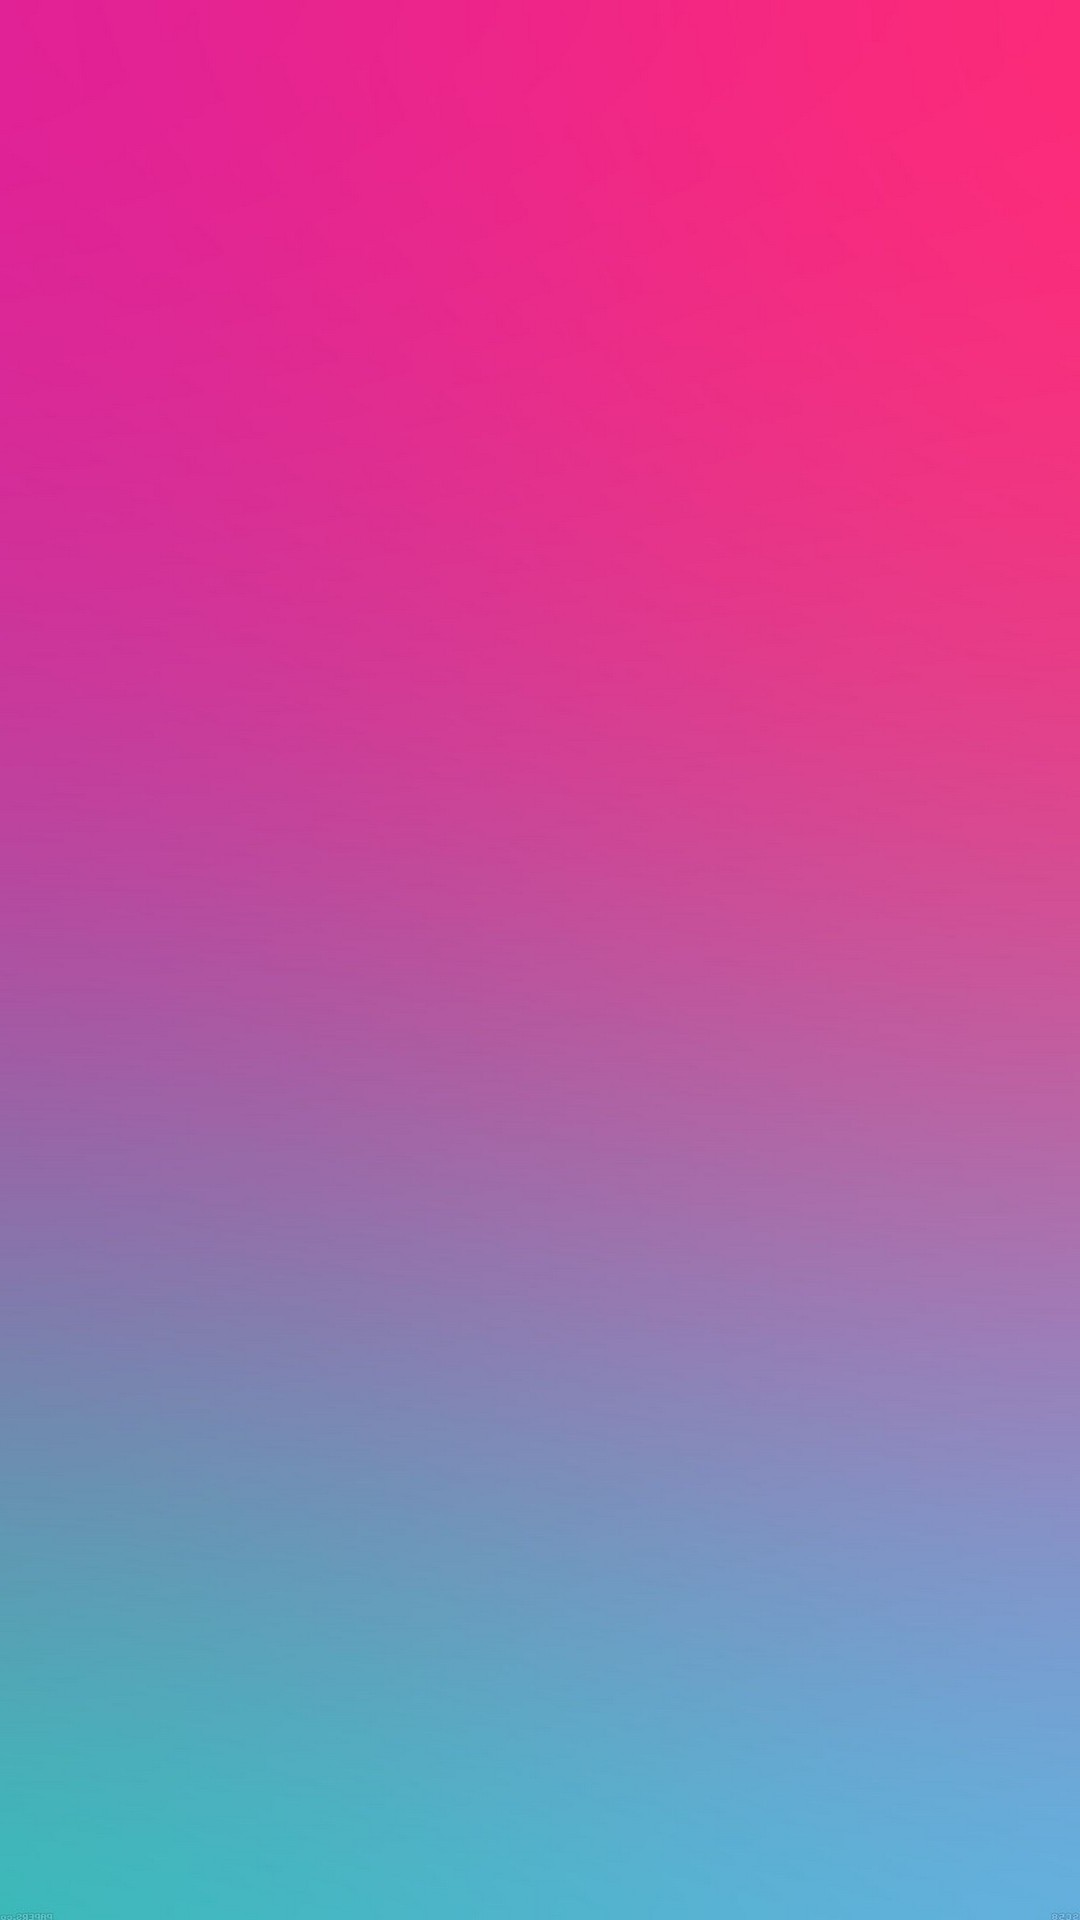 Gradient Wallpaper Android with high-resolution 1080x1920 pixel. You can use this wallpaper for your Android backgrounds, Tablet, Samsung Screensavers, Mobile Phone Lock Screen and another Smartphones device